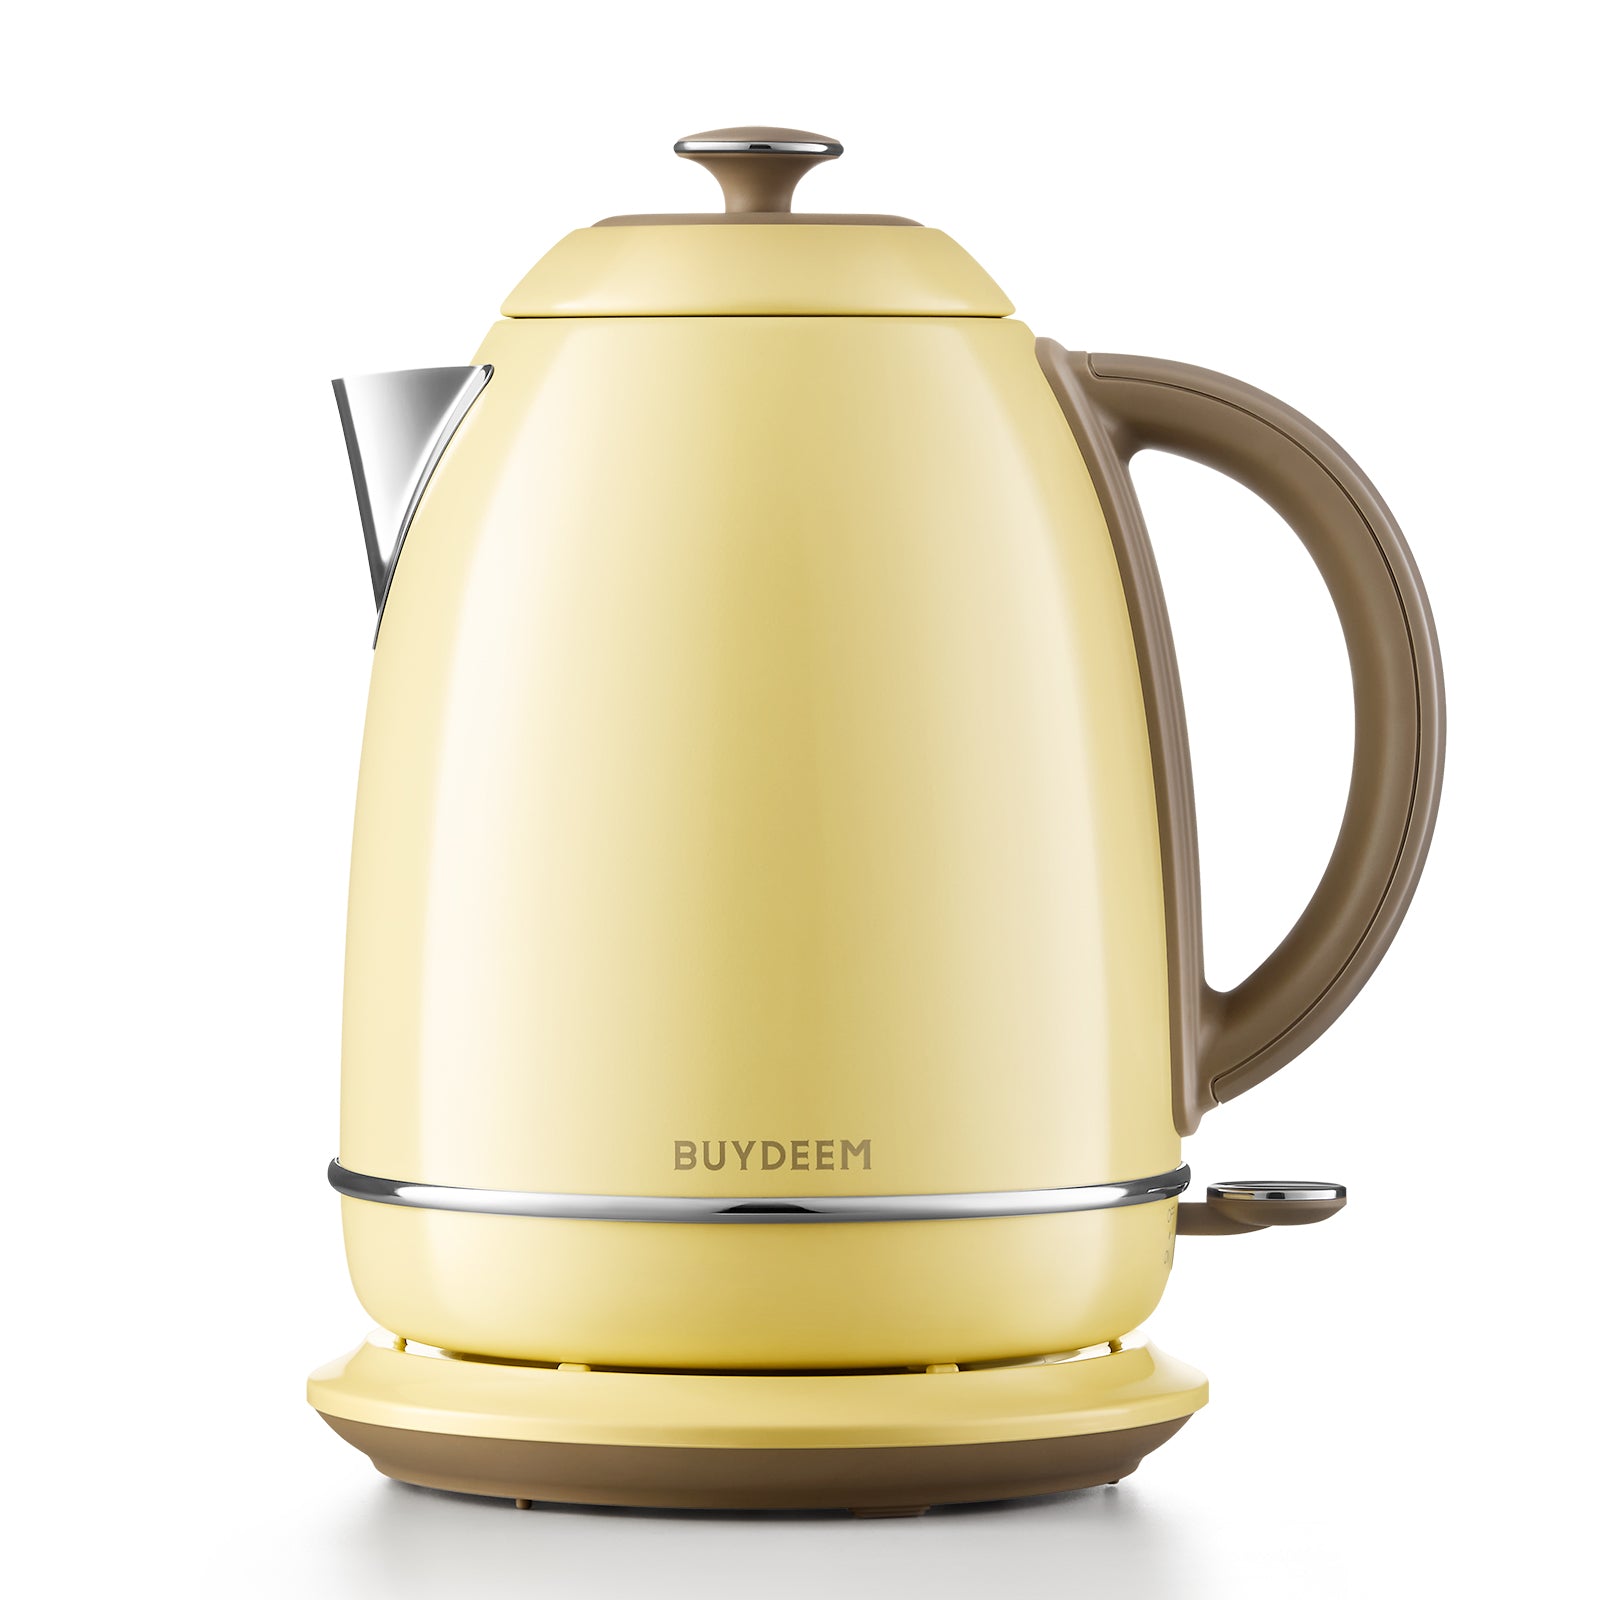 SANJIE D1 Electric Kettle Tea Service Set Japanese Style Stainless Steel  Household Electric Kettle Insulable Electric Furnace From Andy_shop, $94.1